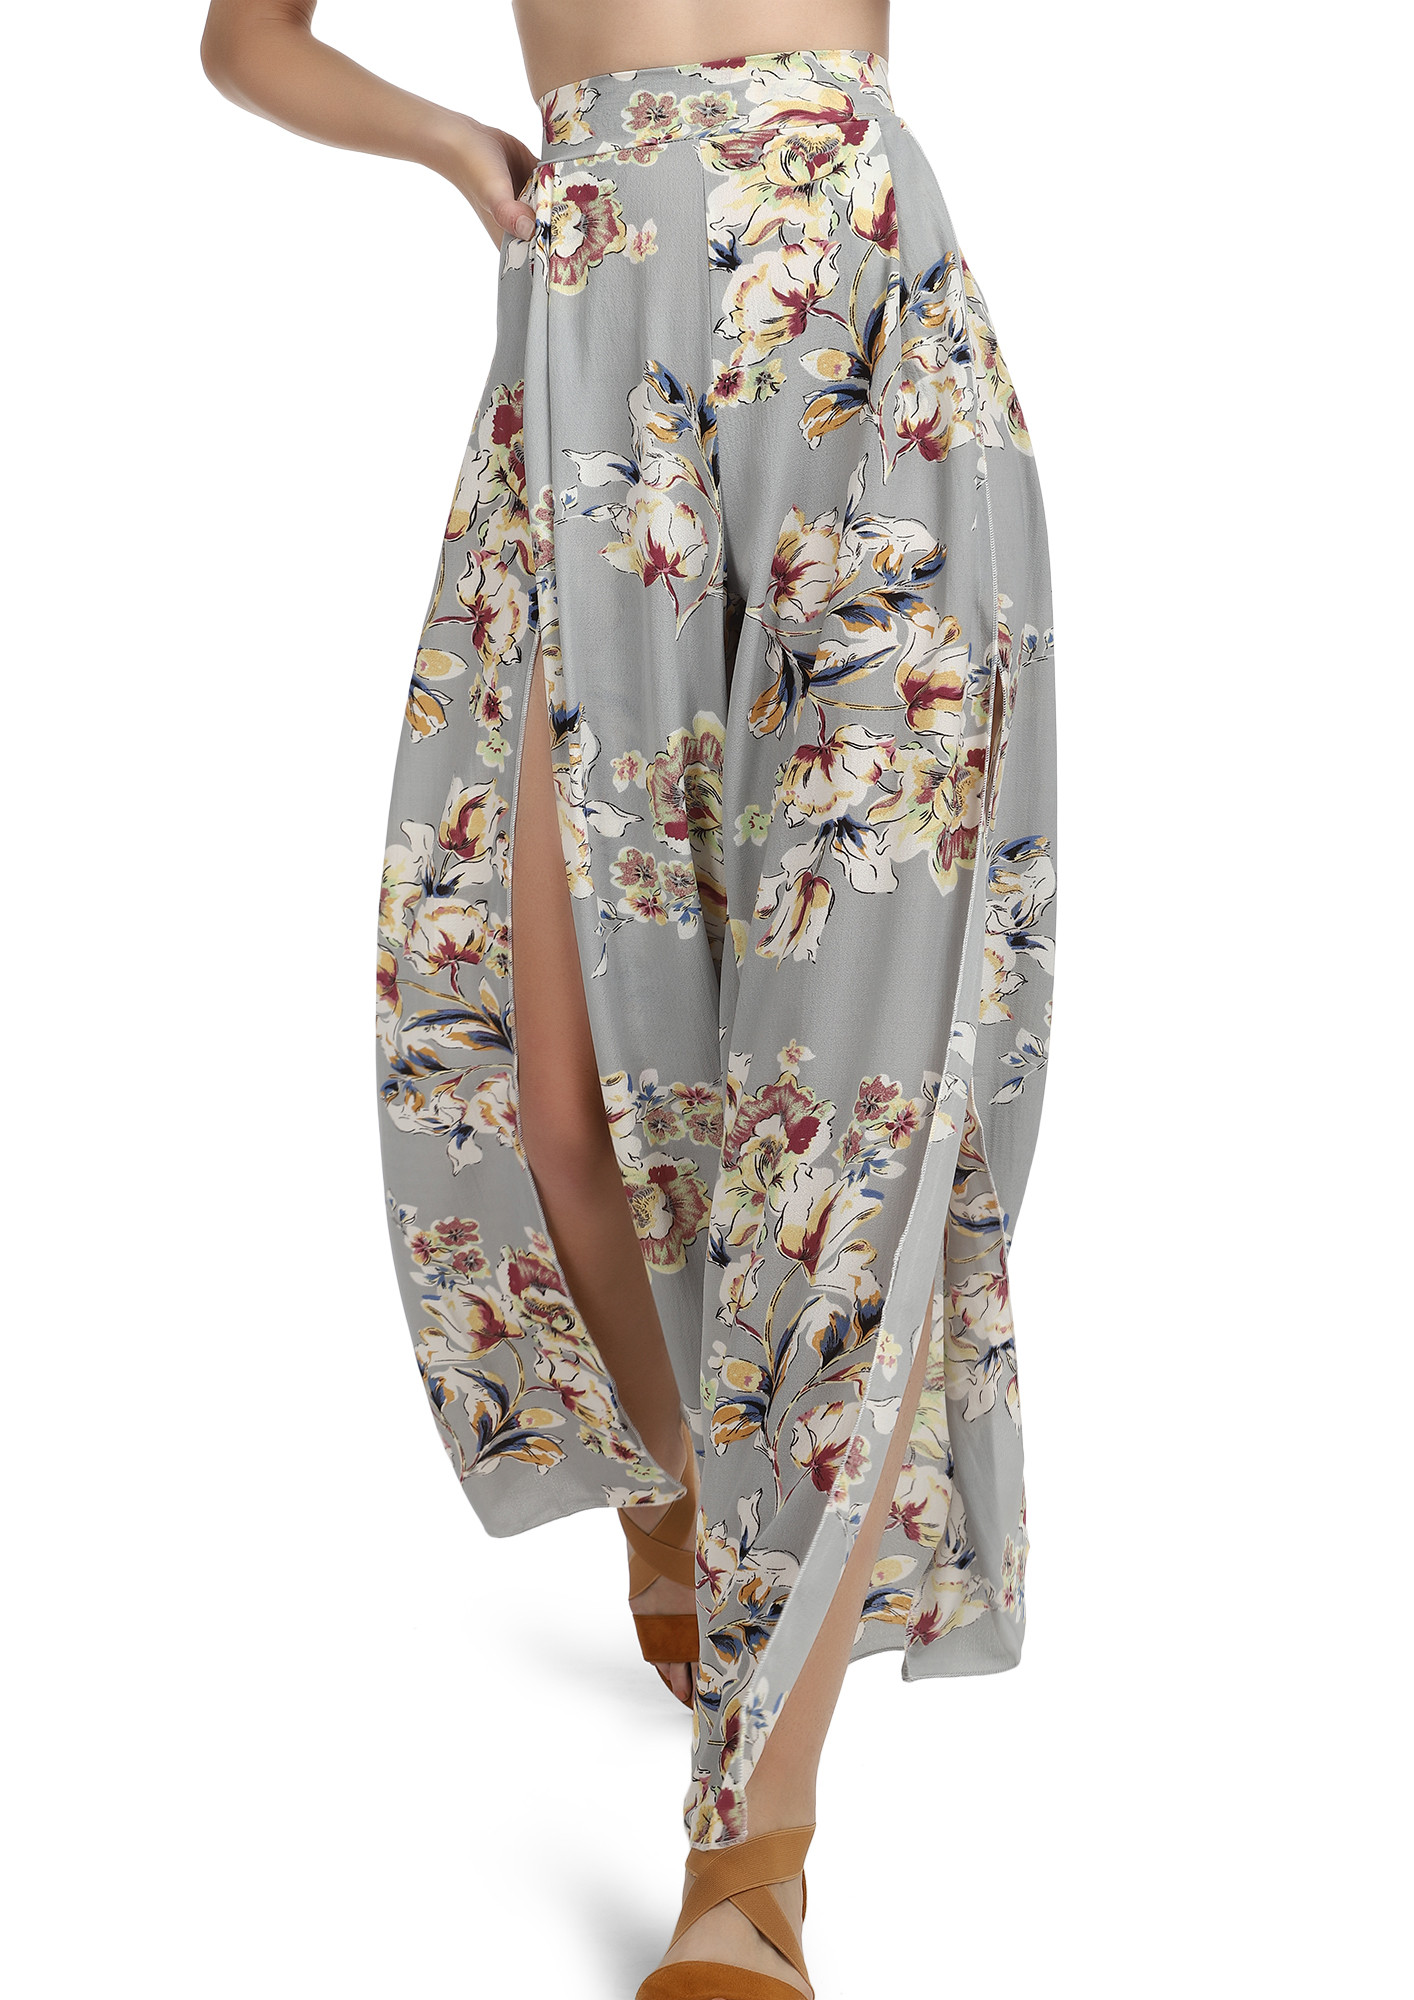 ALL MOST FLOWER READY GREY PALAZZOS 